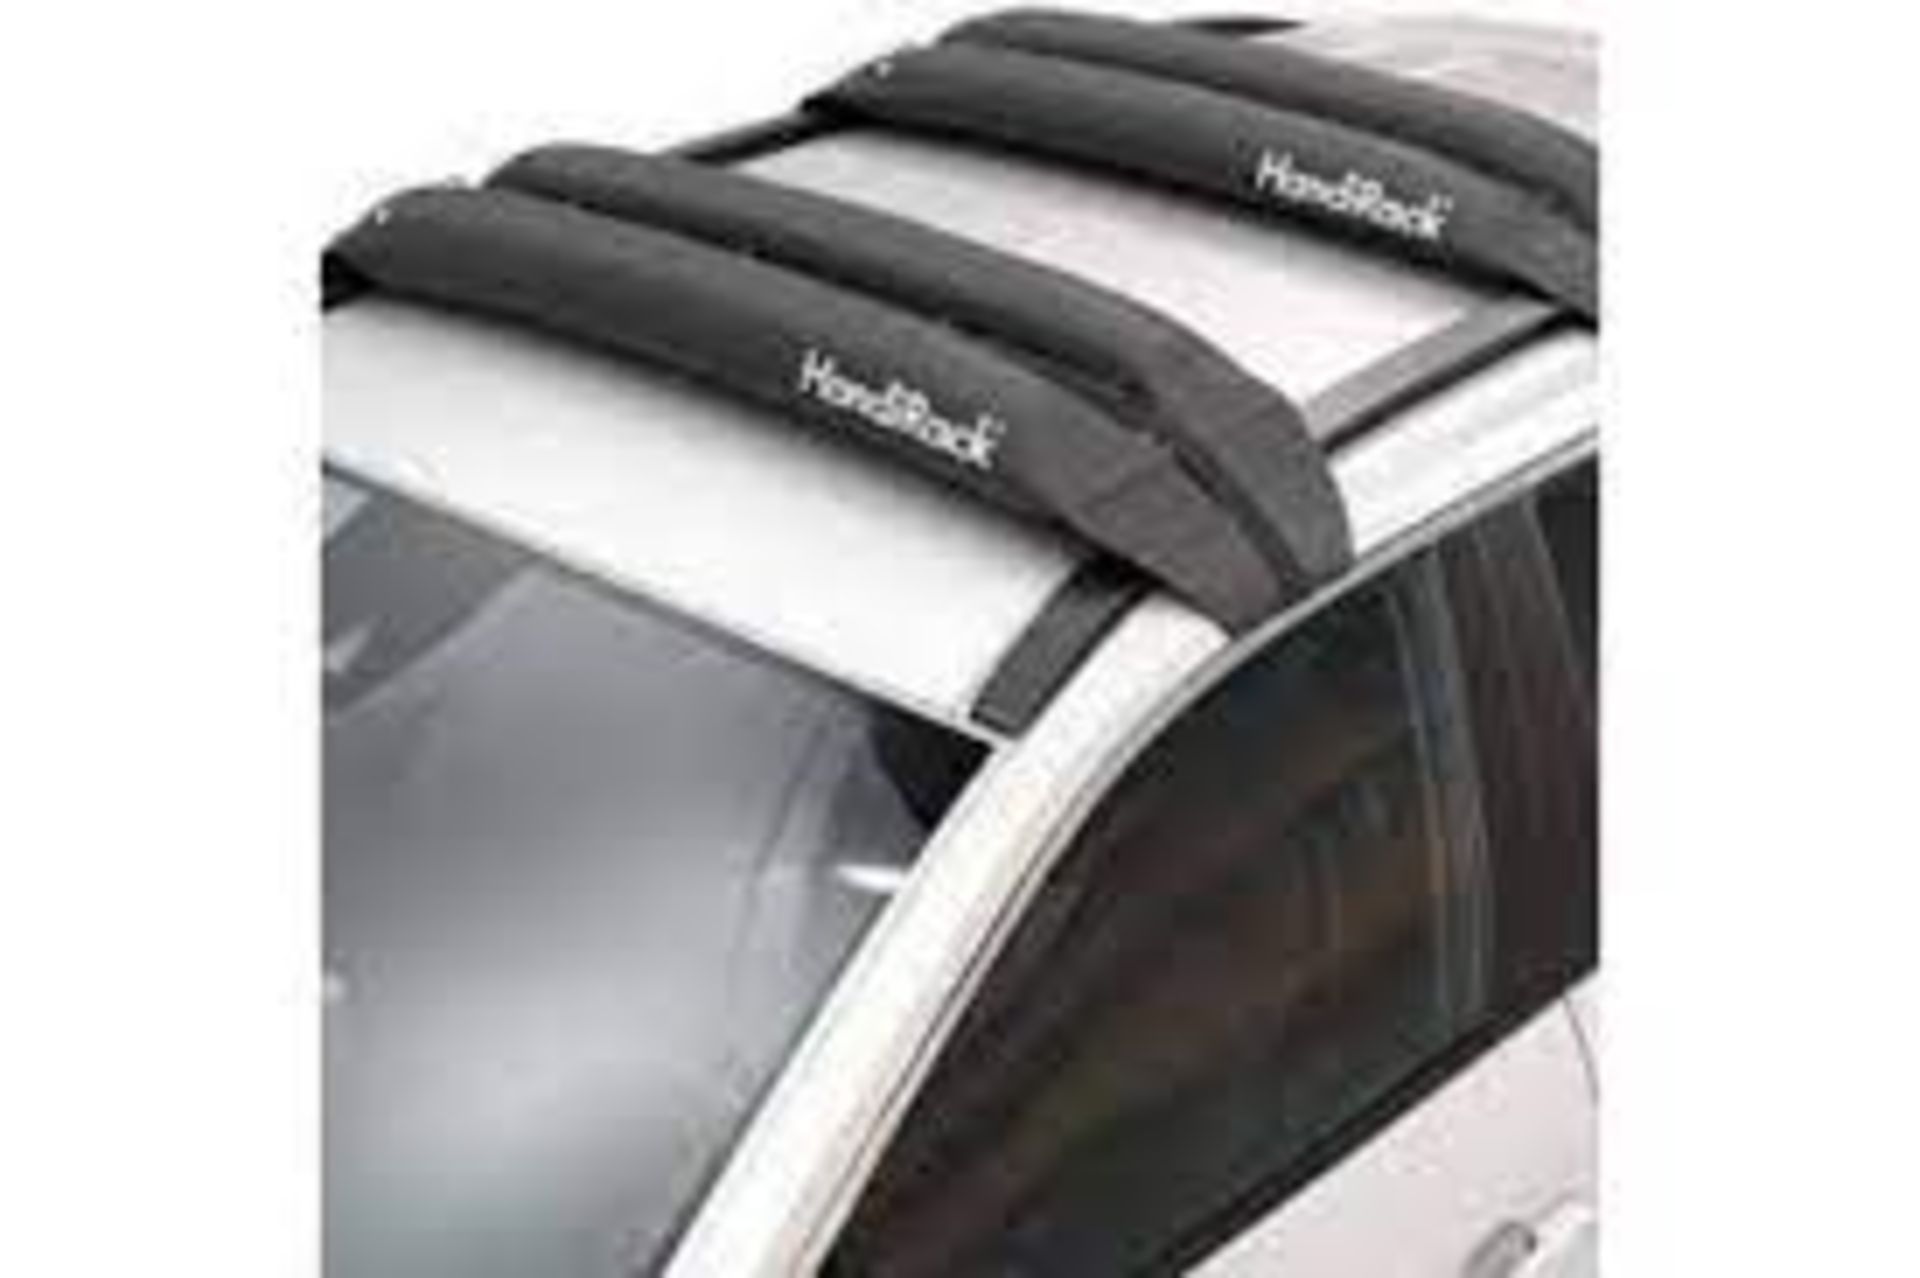 NEW BOXED HandiRack - The Ultimate in Convenience Roofracks. Multi purpose inflatable load